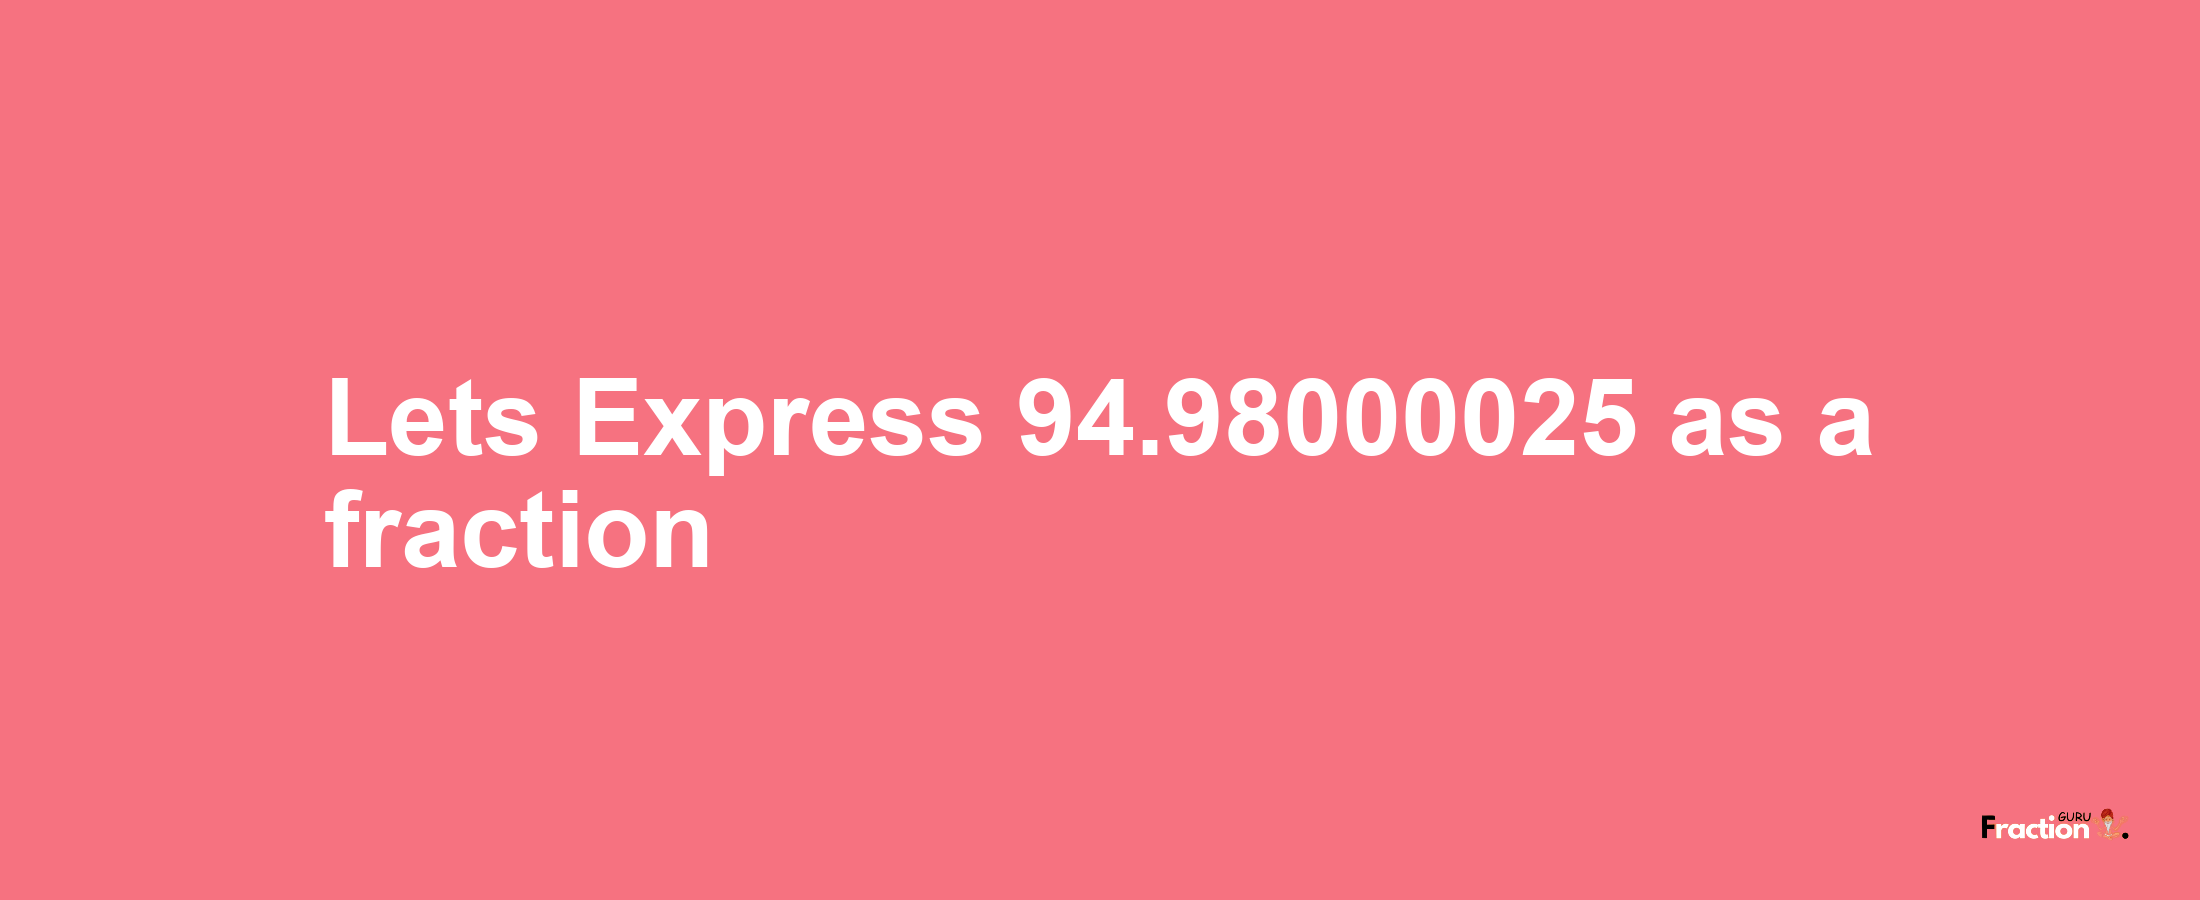 Lets Express 94.98000025 as afraction